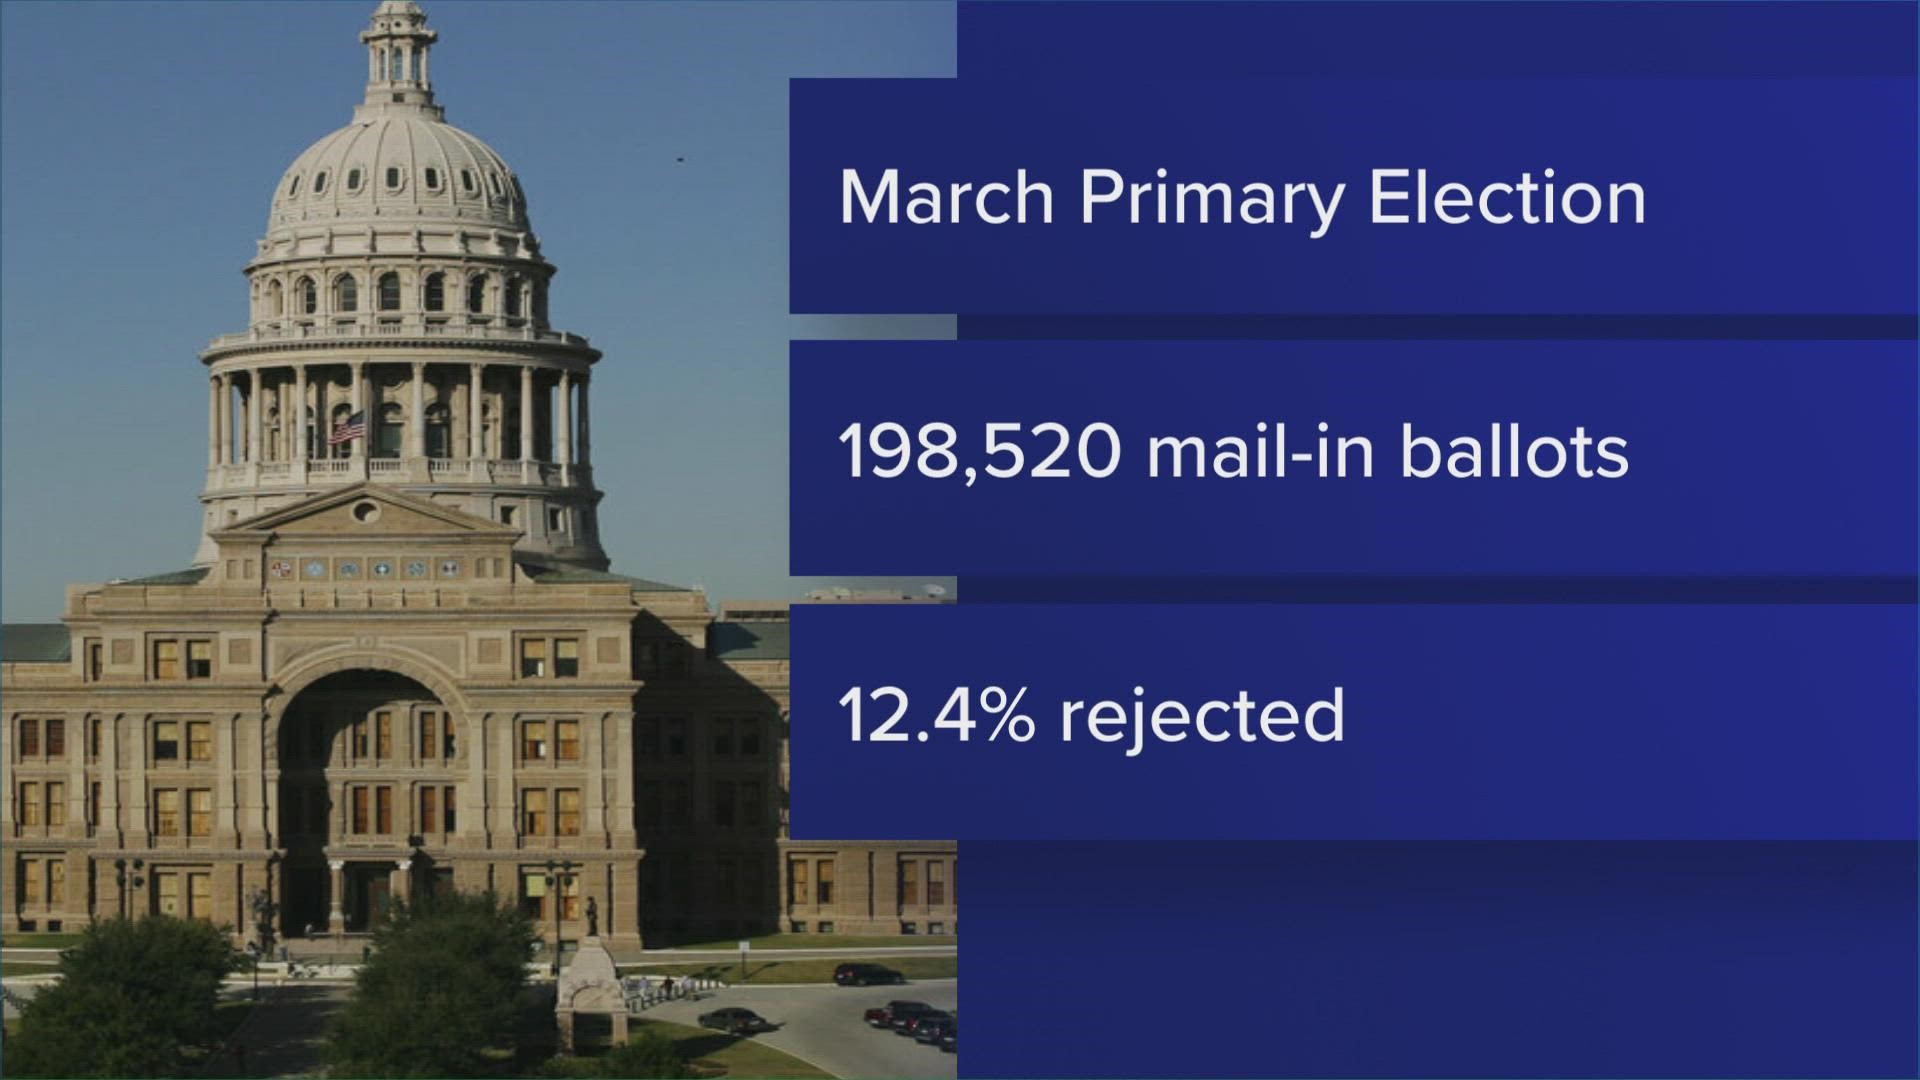 Data from the Texas Secretary of State shows the mail-in ballot rejection rate was less than 4% in the primary runoffs.